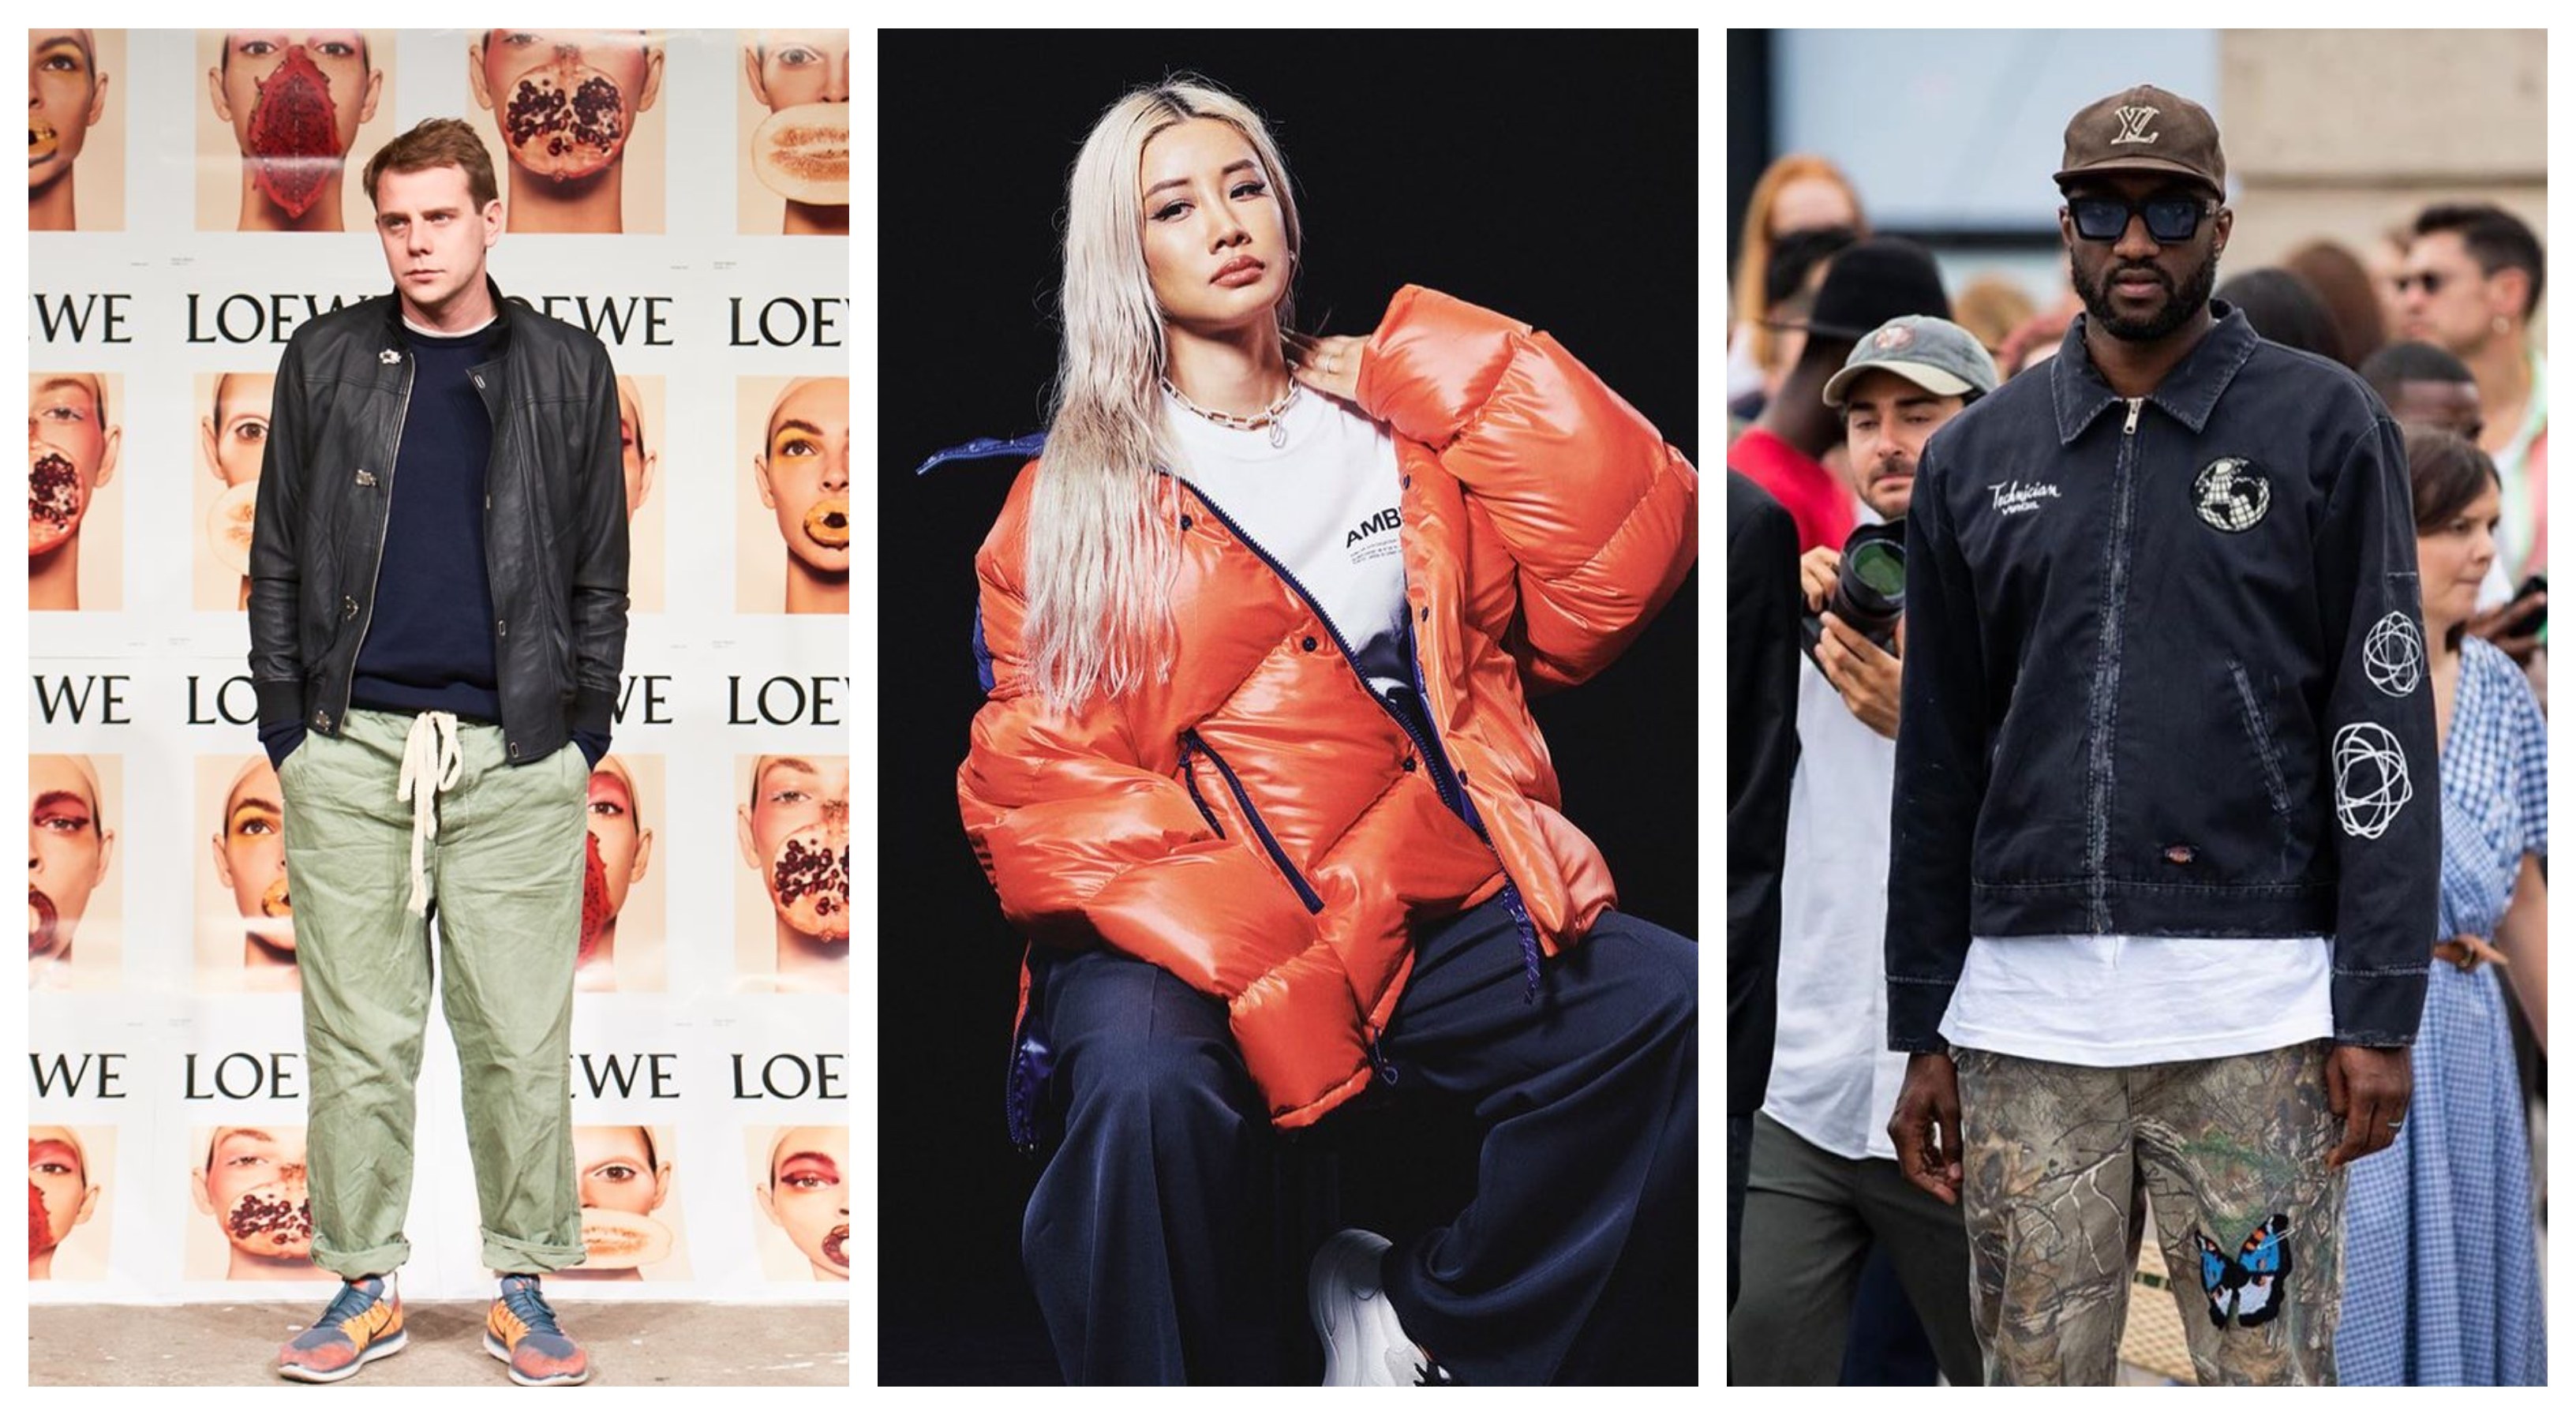 The young streetwear designers turned overnight fashion bigwigs: Jonathan Anderson, Yoon Ahn and Virgil Abloh. Photos: @jonathan_anderson; @yoon_ambush; @virgilabloh/Instagram